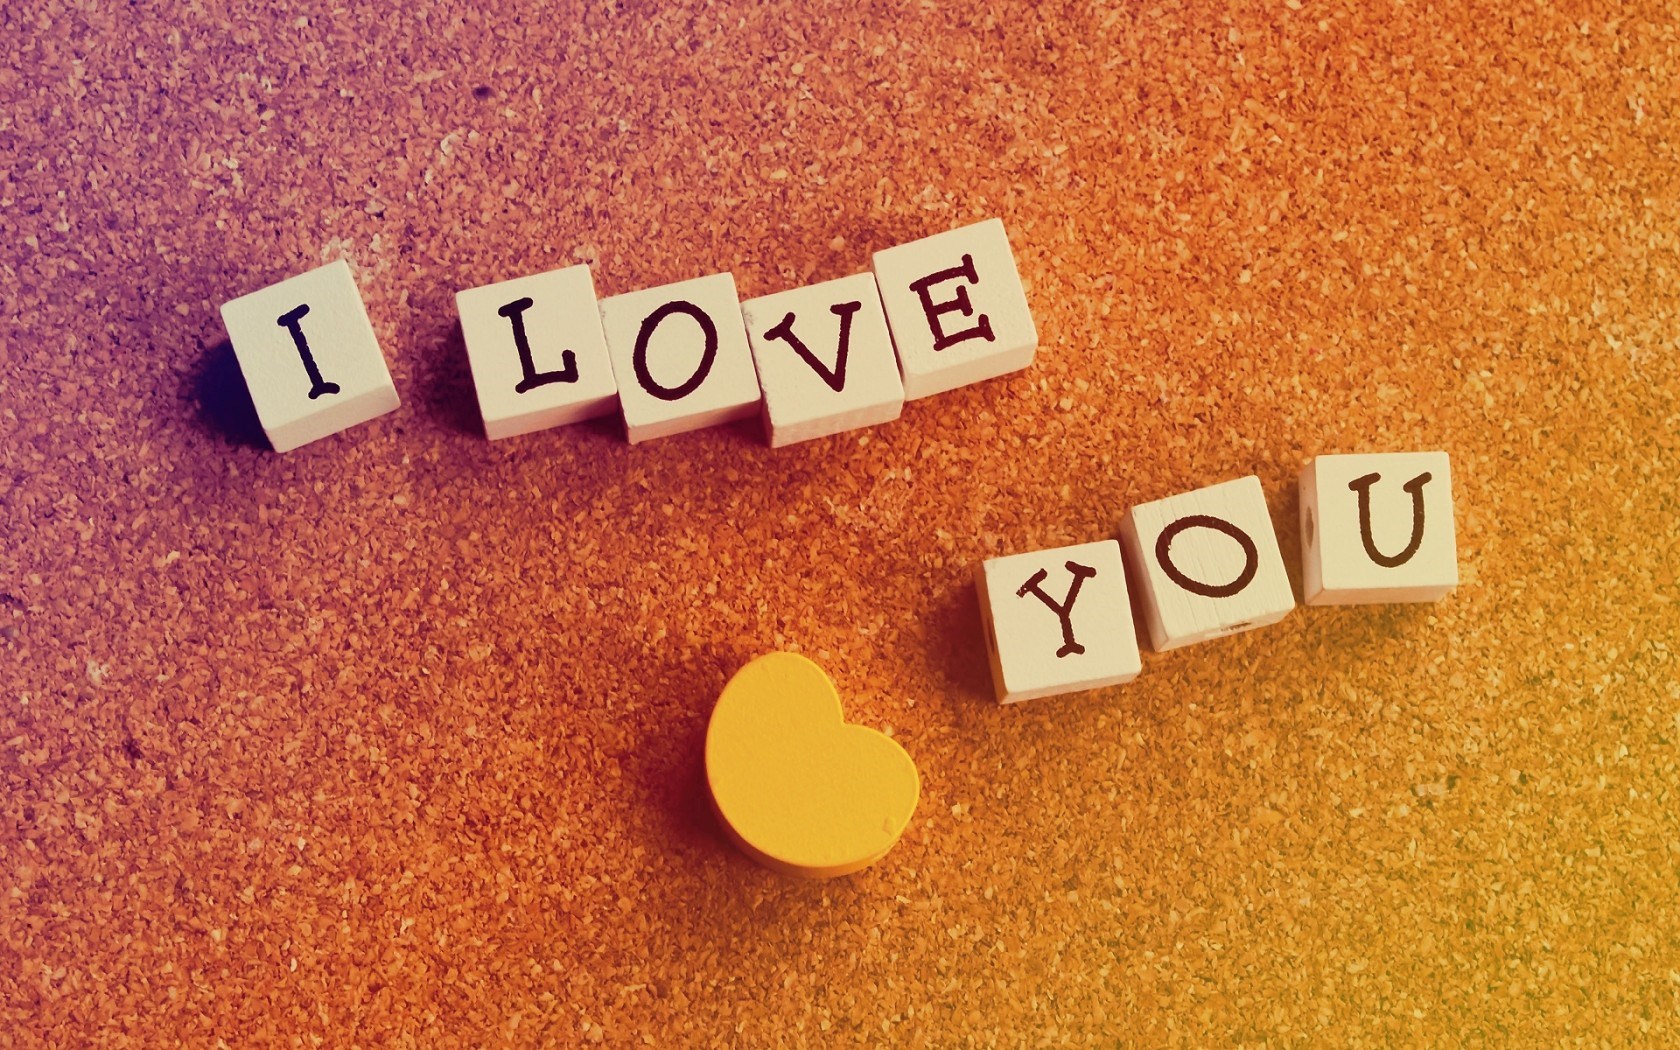 I love you - picture